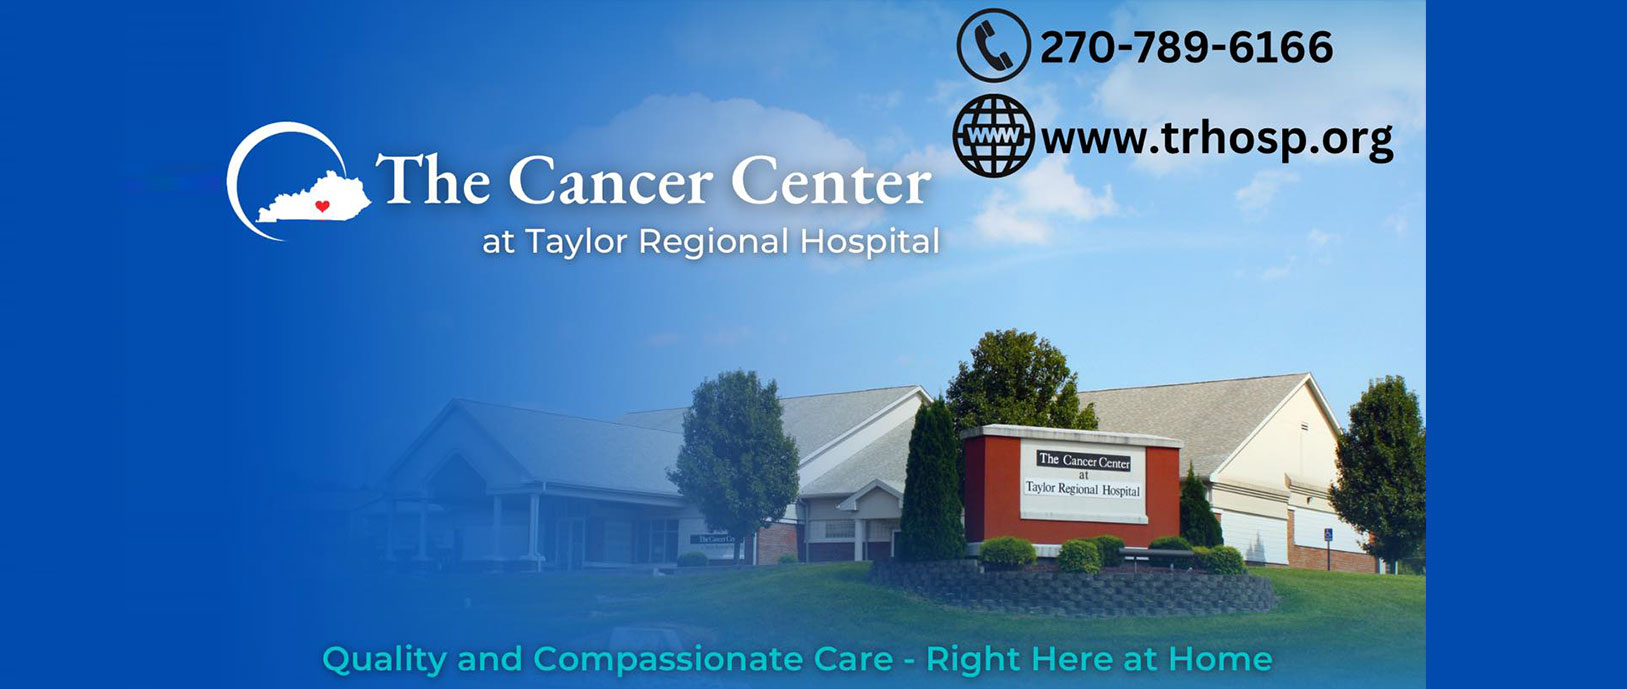 The Cancer Center at Taylor Regional Hospital